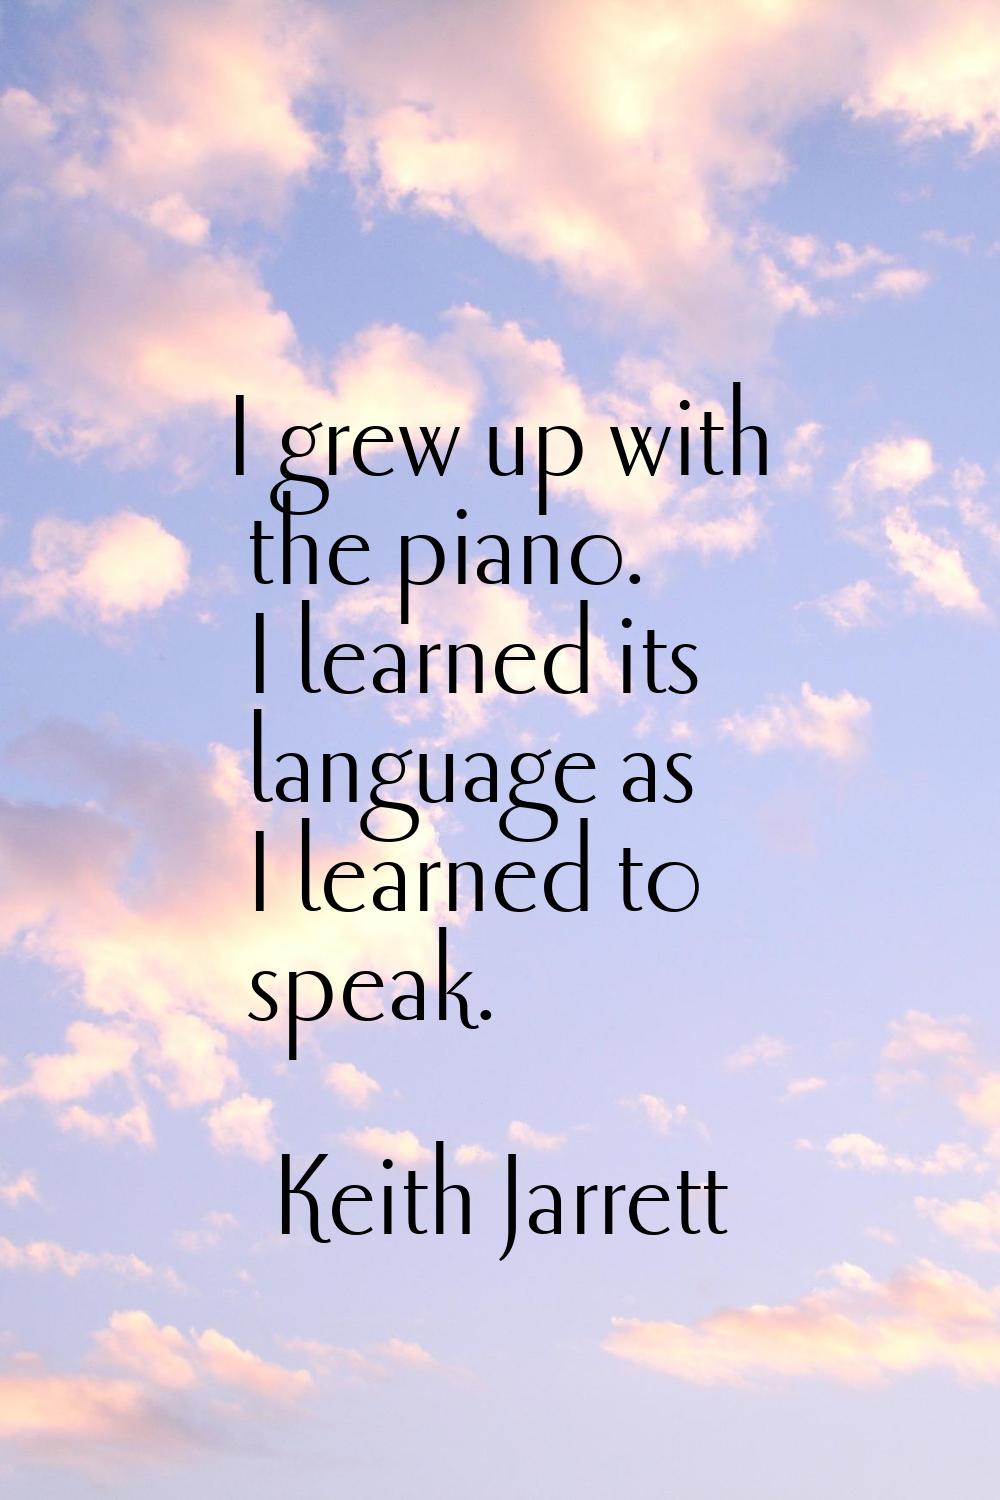 I grew up with the piano. I learned its language as I learned to speak.